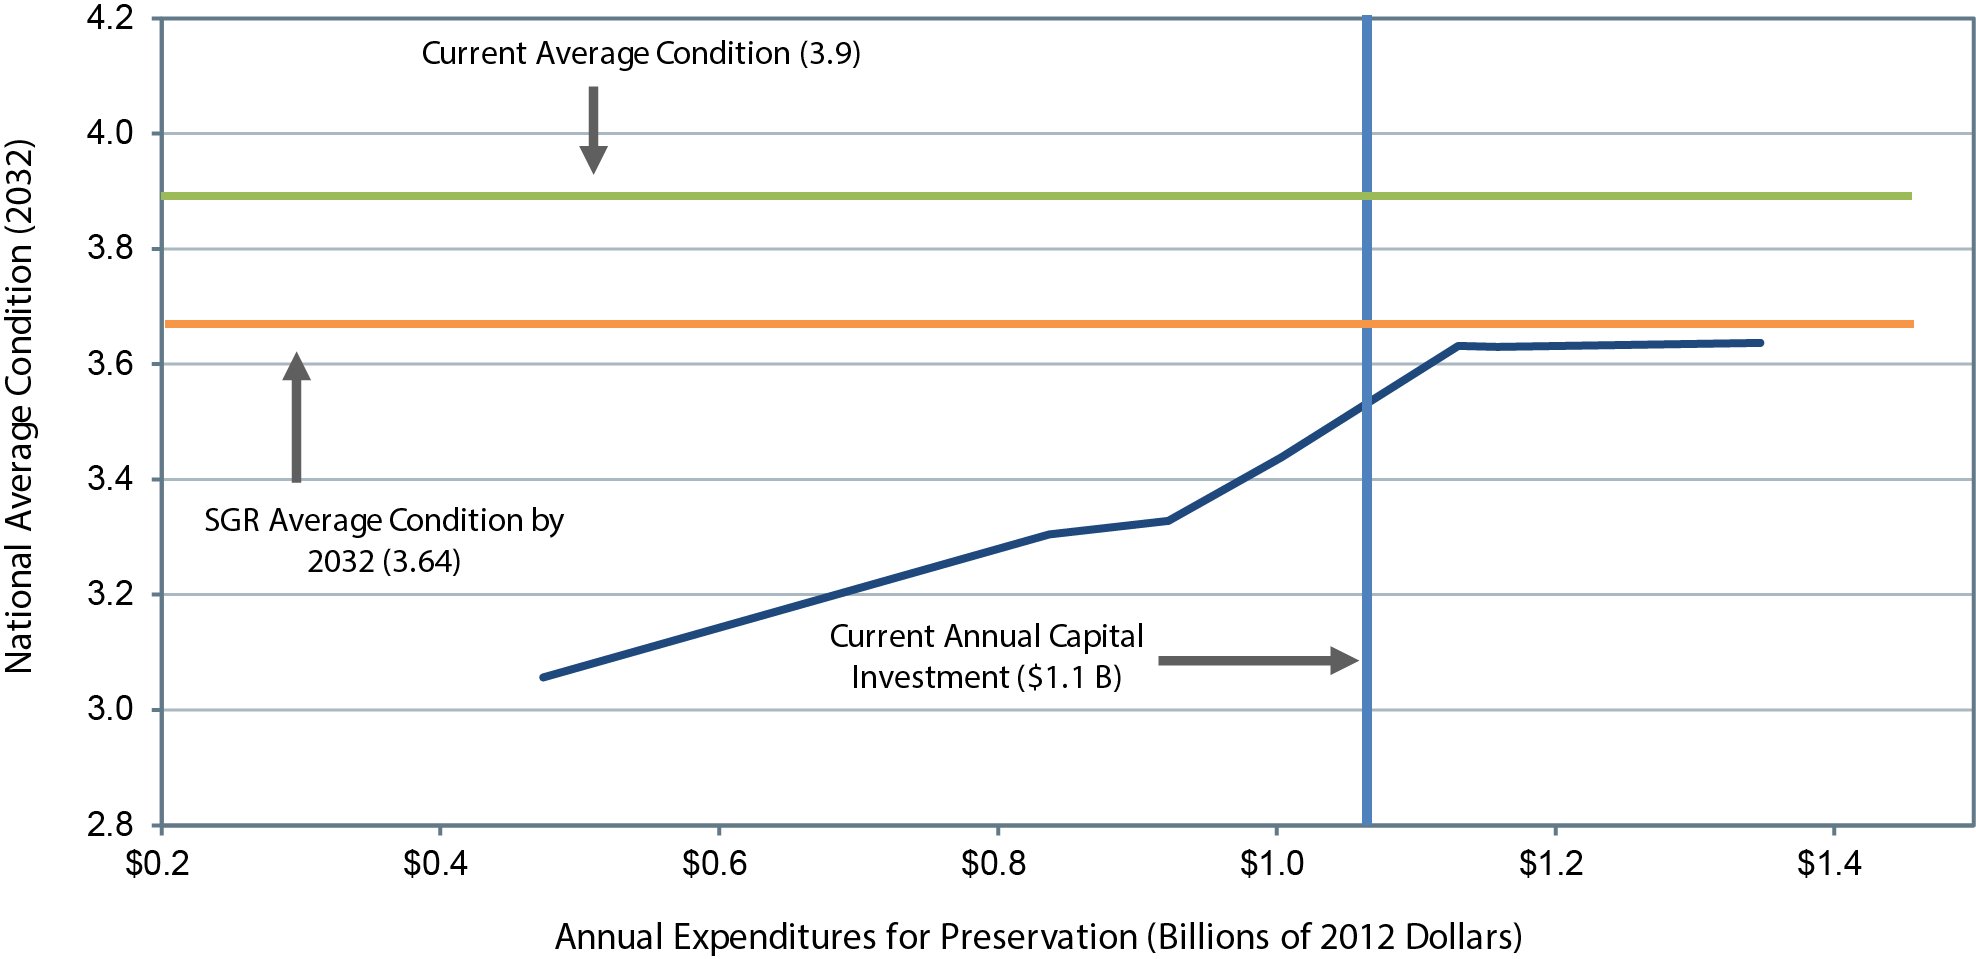 A line chart plots national average condition rating over annual expenditures for preservation in billions of 2012 dollars. The plot has an initial rating of 3.06 at an annual expenditure of $0.5 billion. The trend is upward to a value of 3.44 at an average annual investment of $1.0 billion, levels off to reach a value of 3.63 at an average annual investment of $1.1 billion, and climbs to end at a value of 3.64 at an annual expenditure of $1.3 billion. The plot intersects at a rating of 3.63 at the annual current annual capital investment of $1.1 billion. The current average condition is shown as a rating of 3.9, and the SGR average condition by 2032 is shown as a rating of 3.64. Source: Transit Economic Requirements Model. 